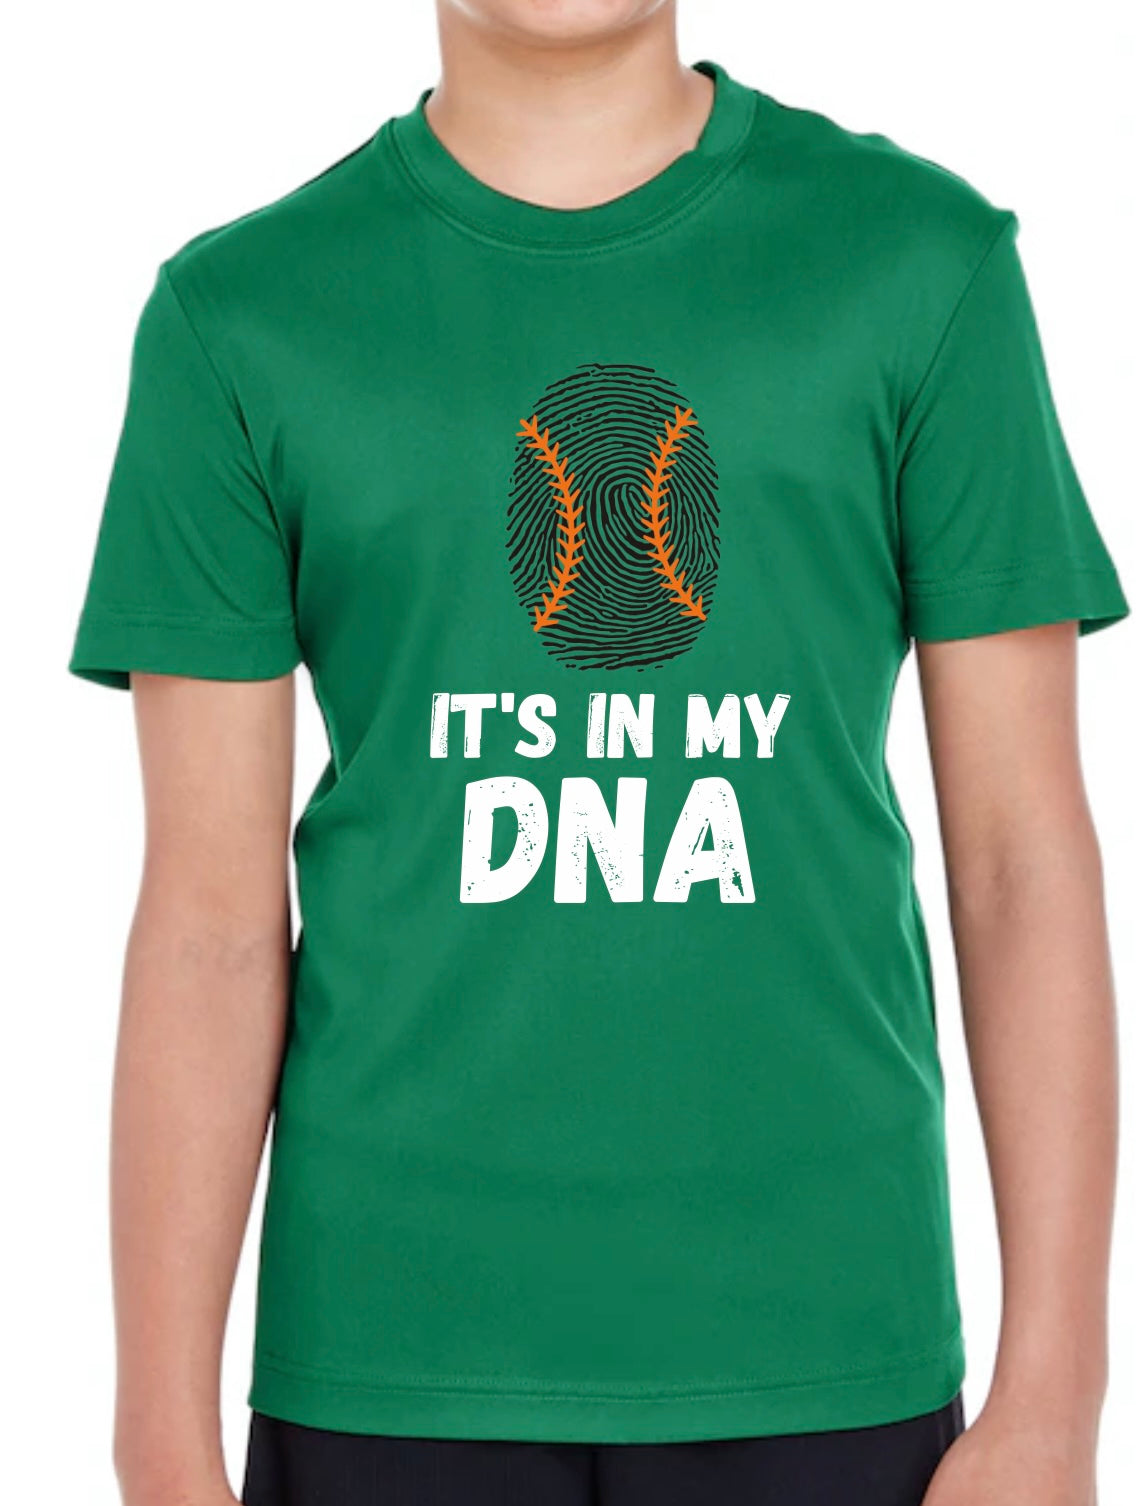 In My DNA Baseball Dry Fit